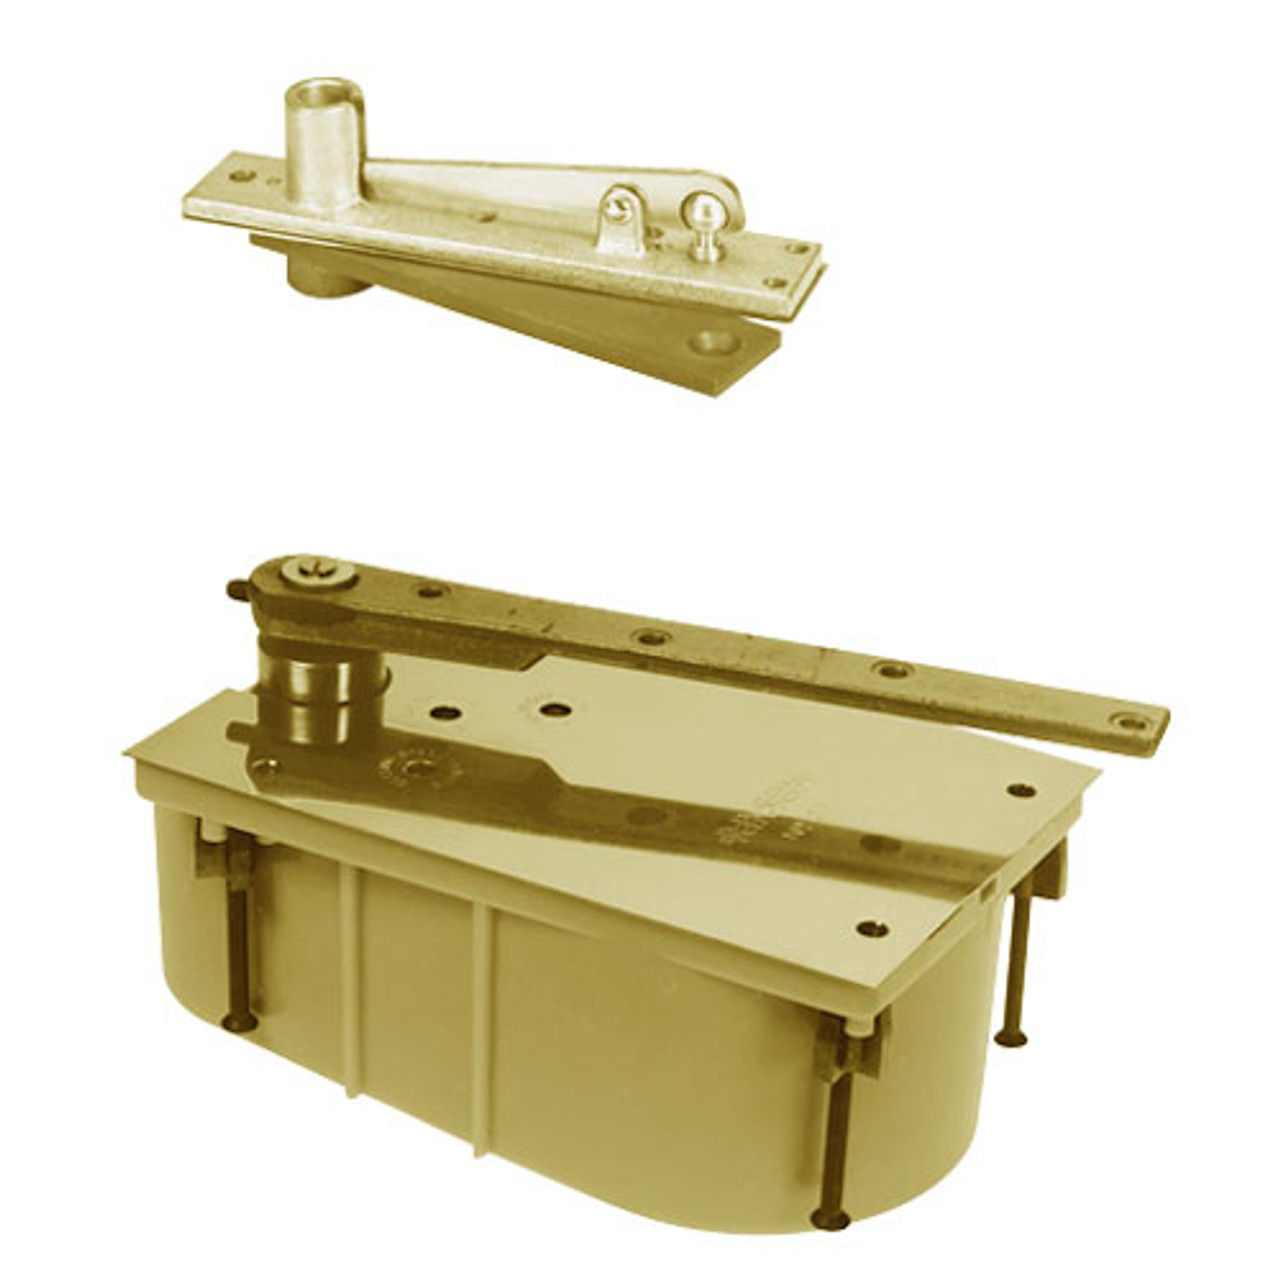 PH28-85N-554-CWF-LH-606 Rixson 28 Series Heavy Duty Single Acting Center Hung Floor Closer with Concealed Arm in Satin Brass Finish